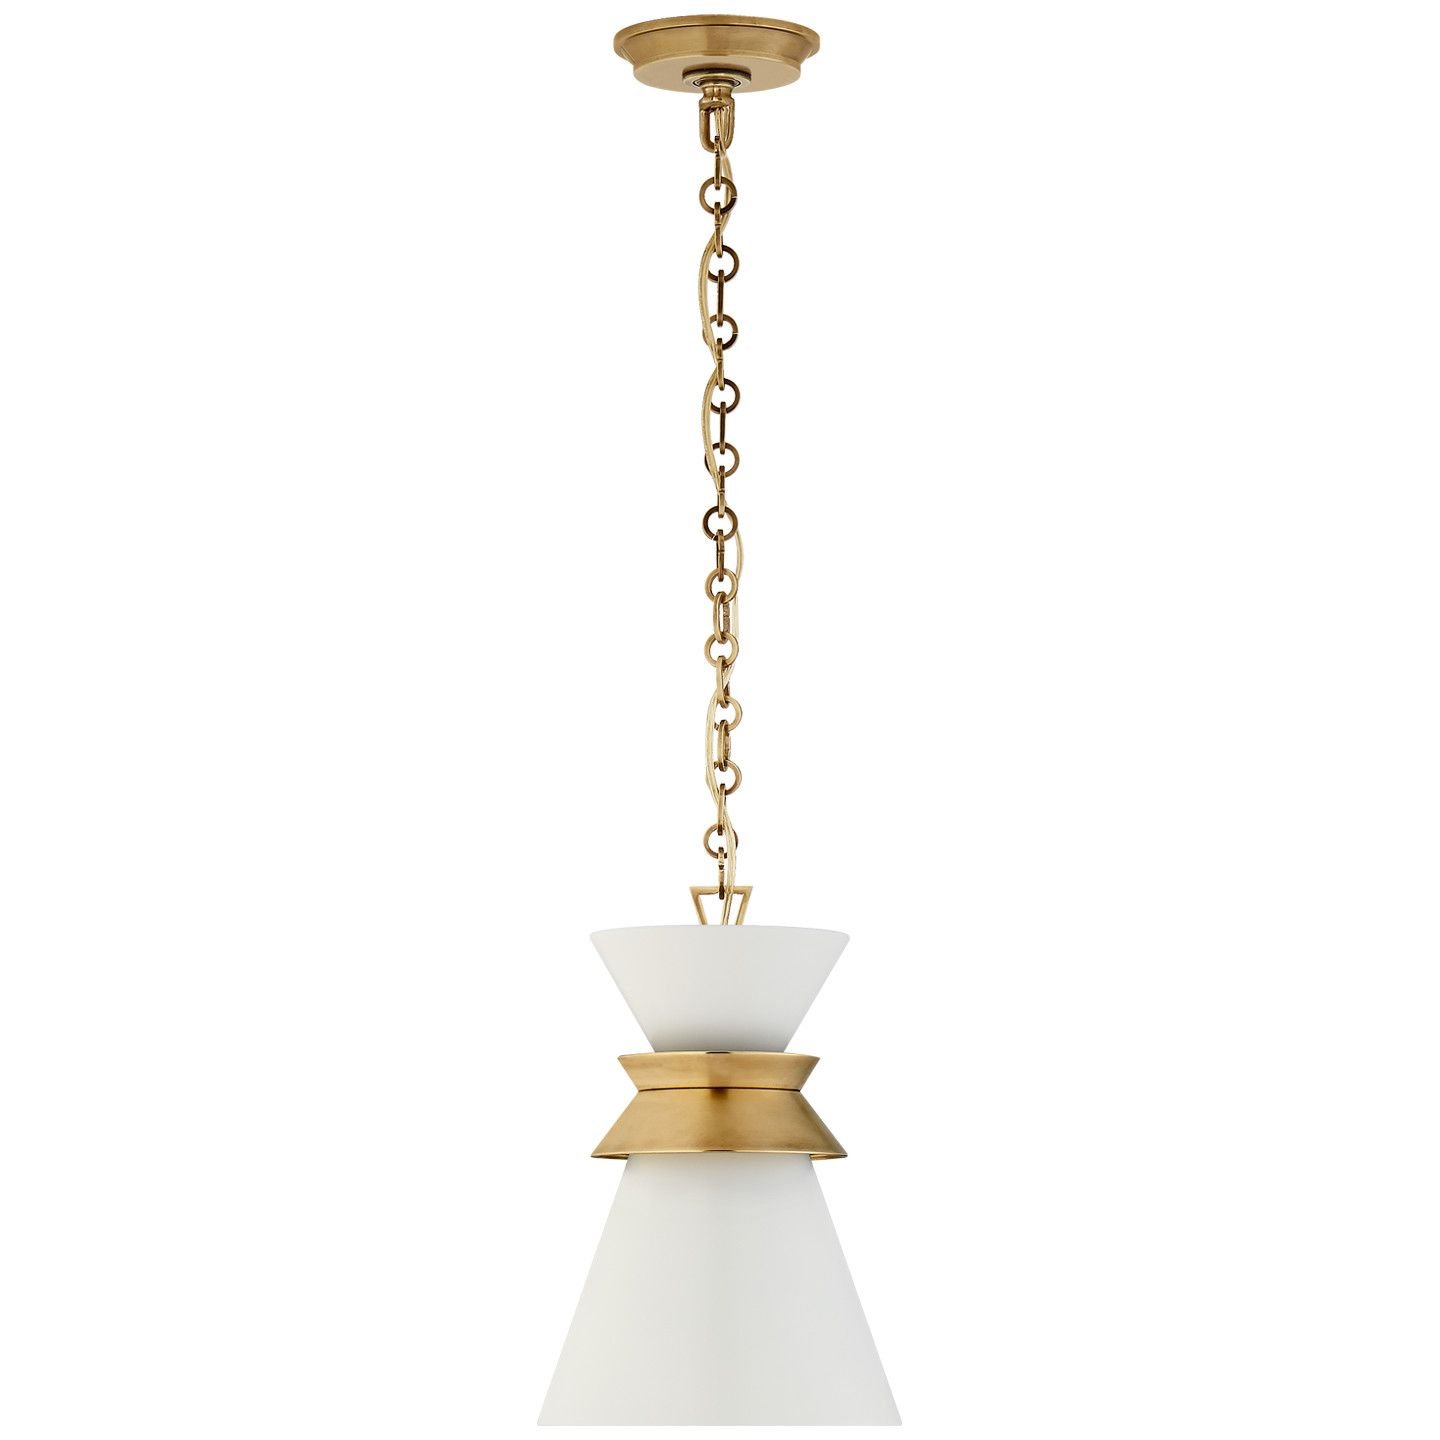 Alborg Small Stacked Pendant Antique- Burnished Brass/White Shade